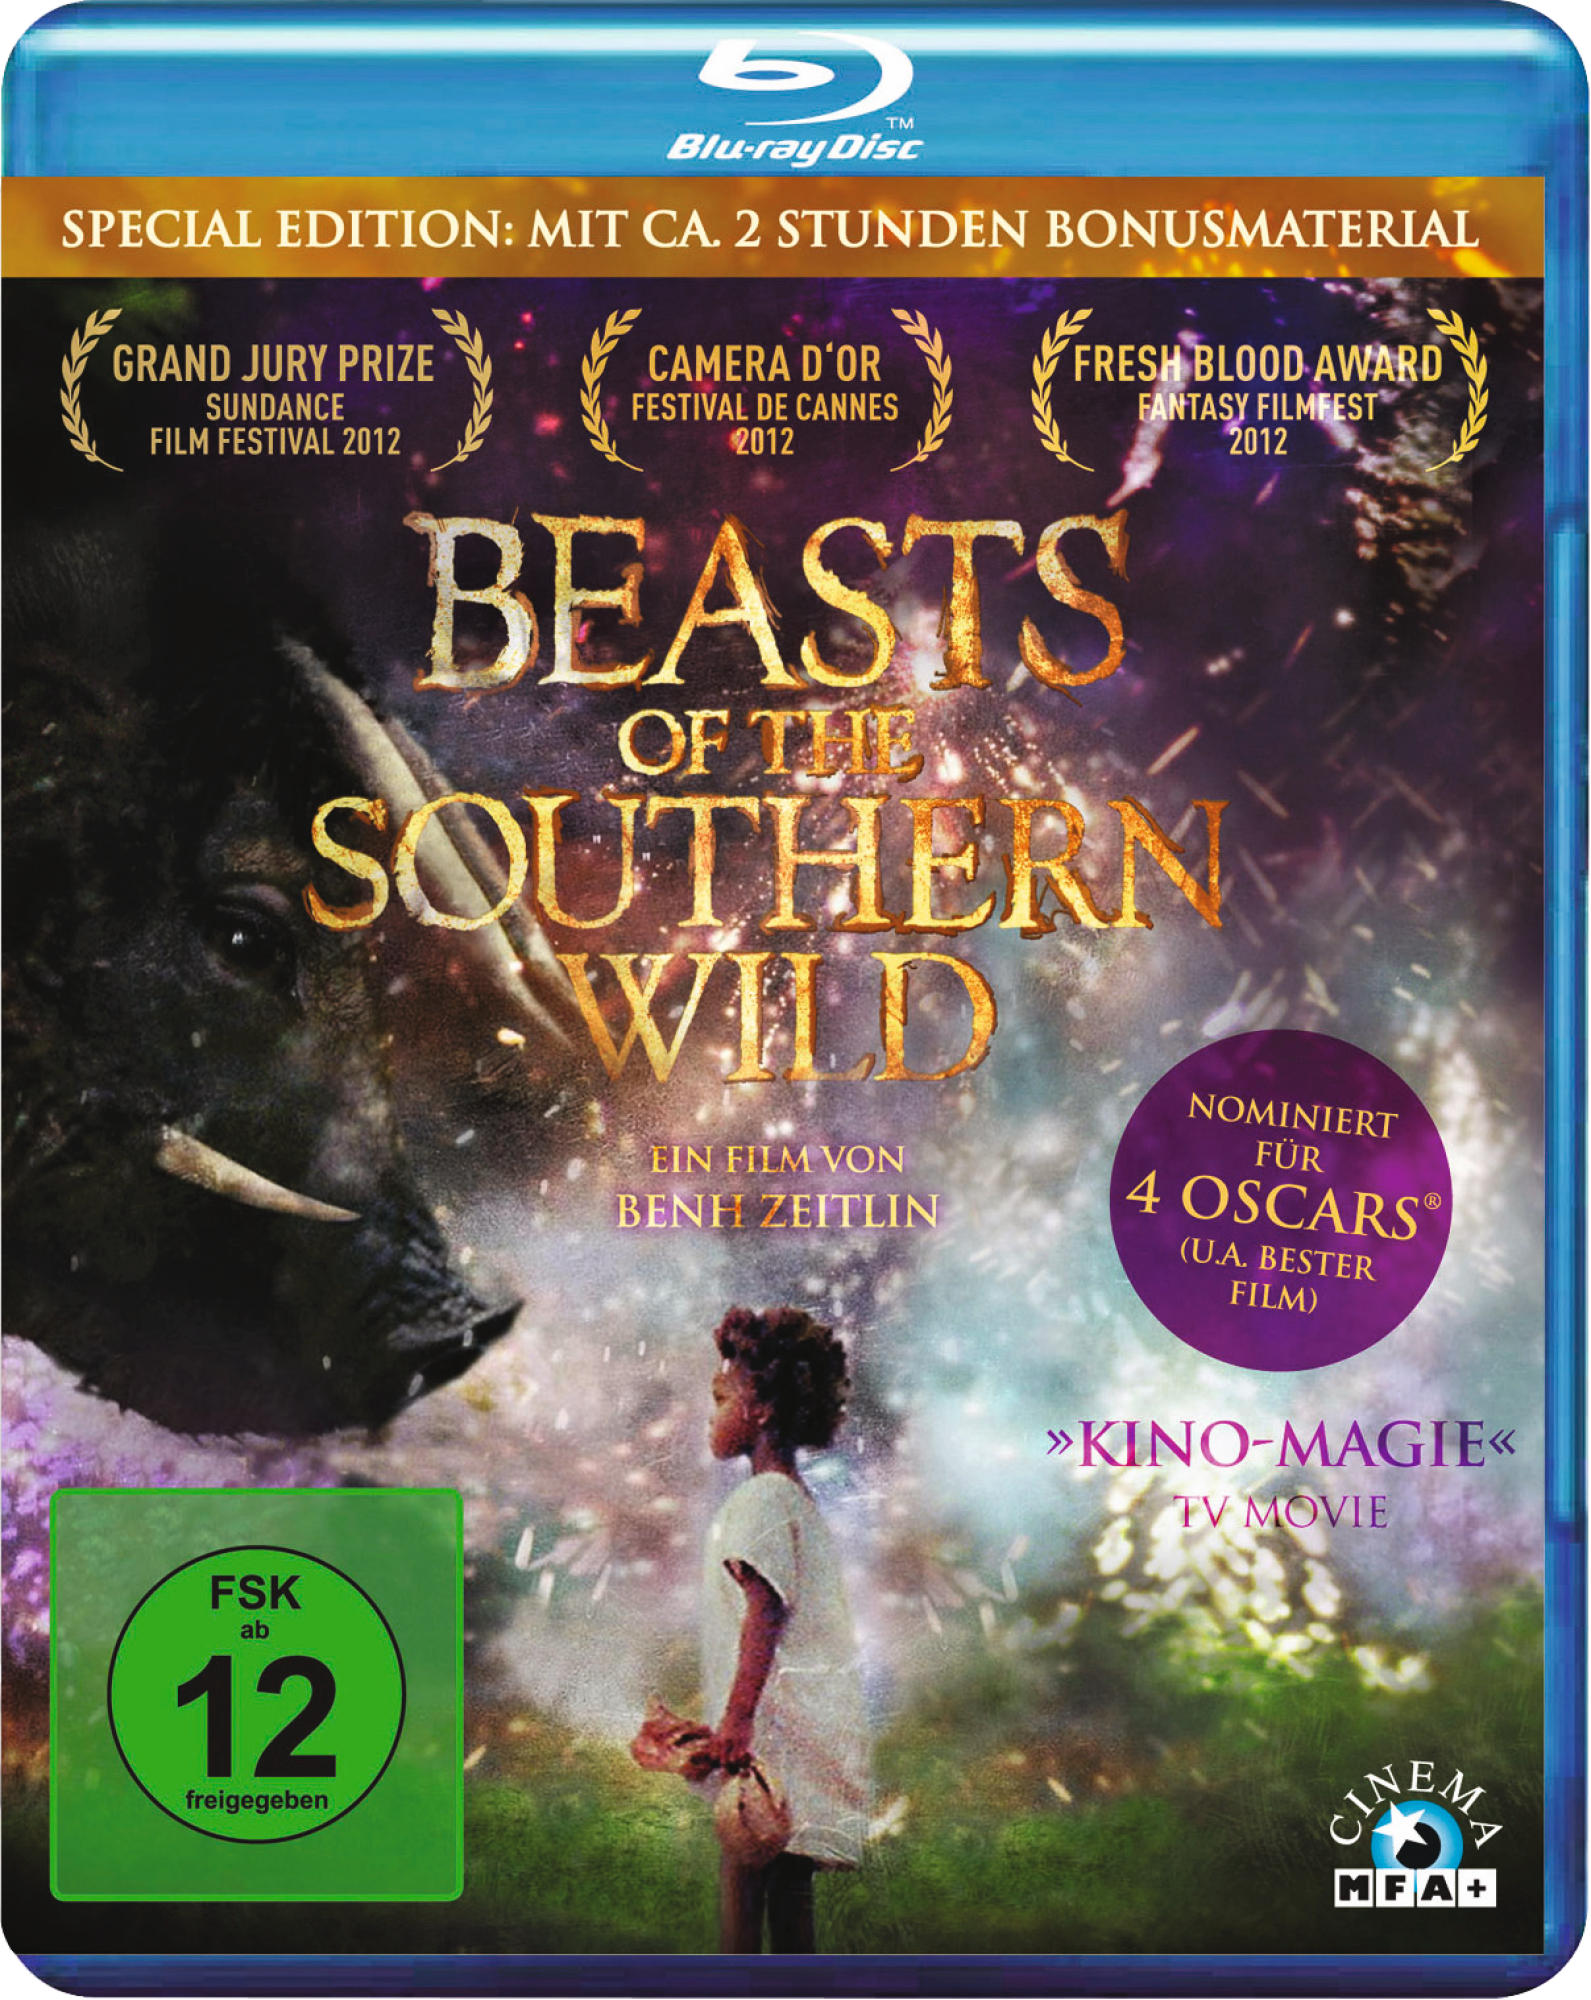 Beasts Southern Of Blu-ray Edition) (Special Wild The